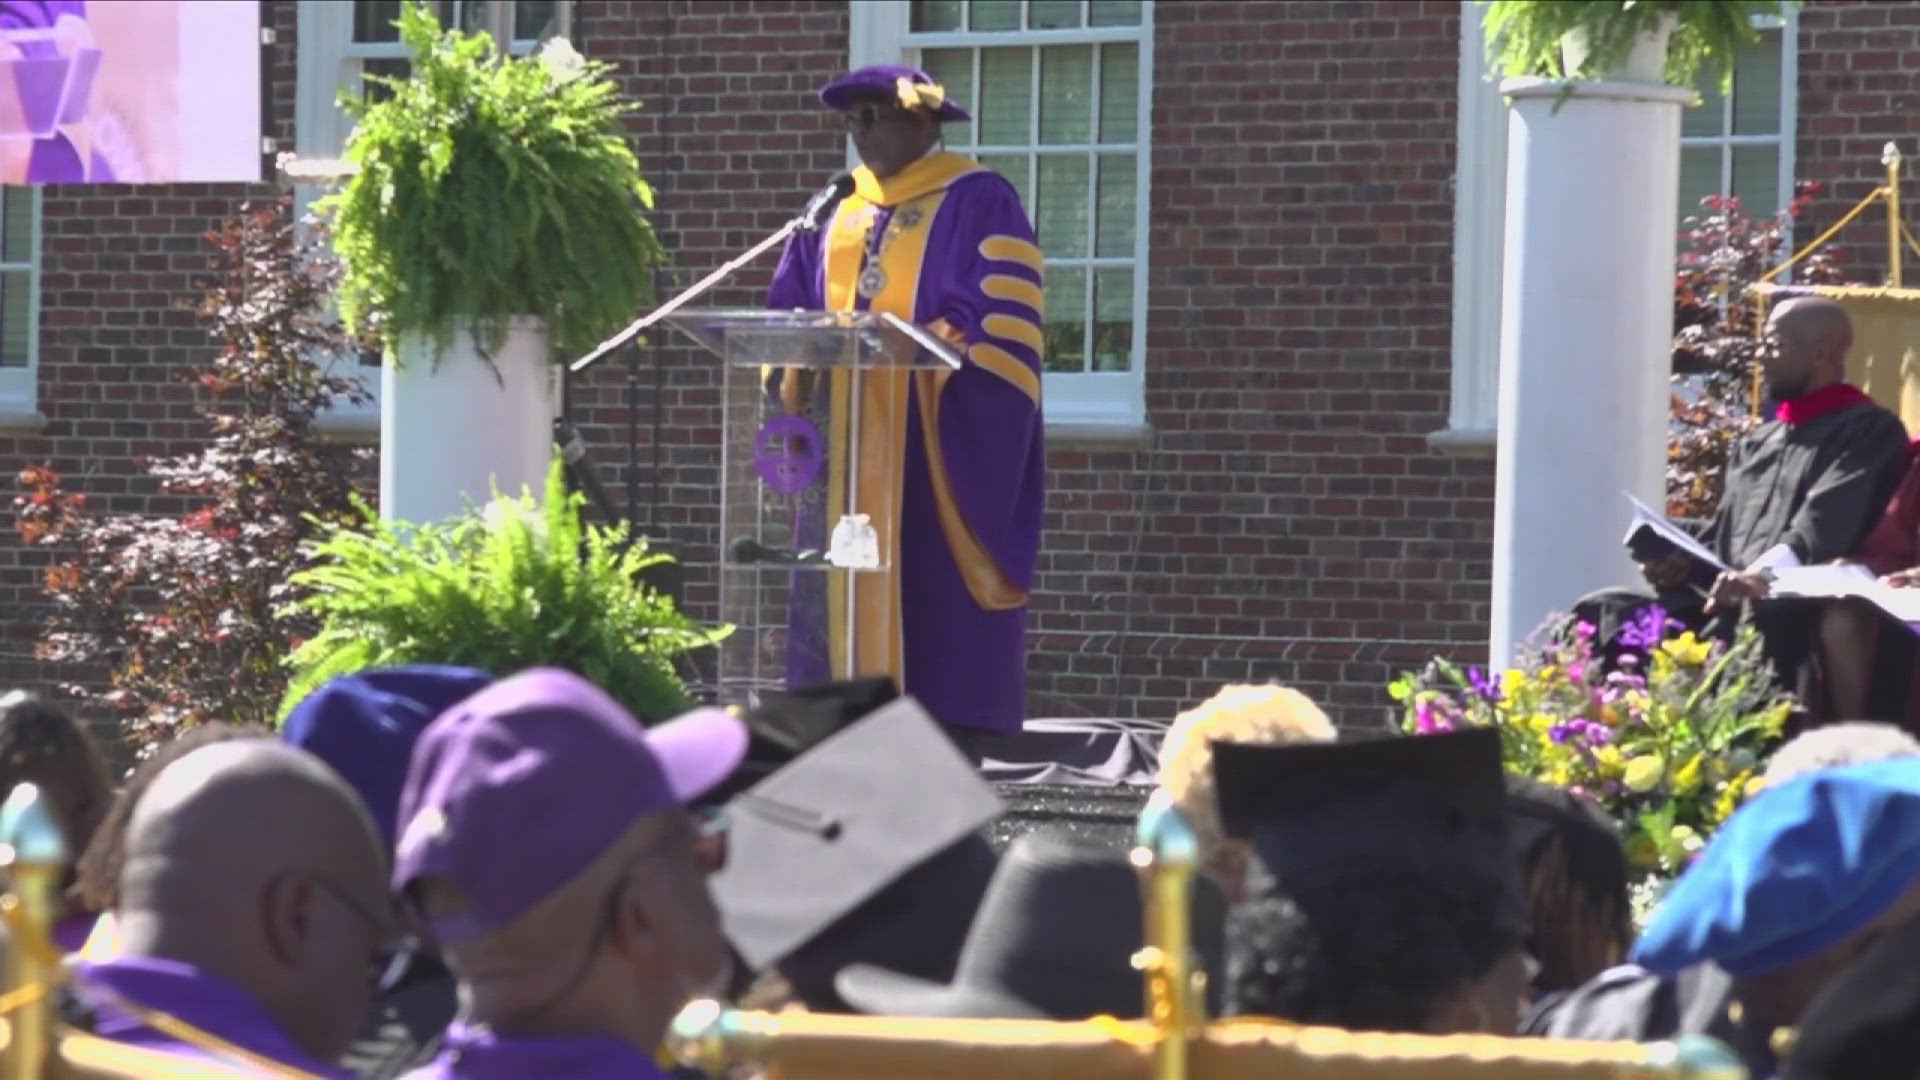 For the first time in decades, the ceremony was held on the historic Brownlee Hall Lawn.